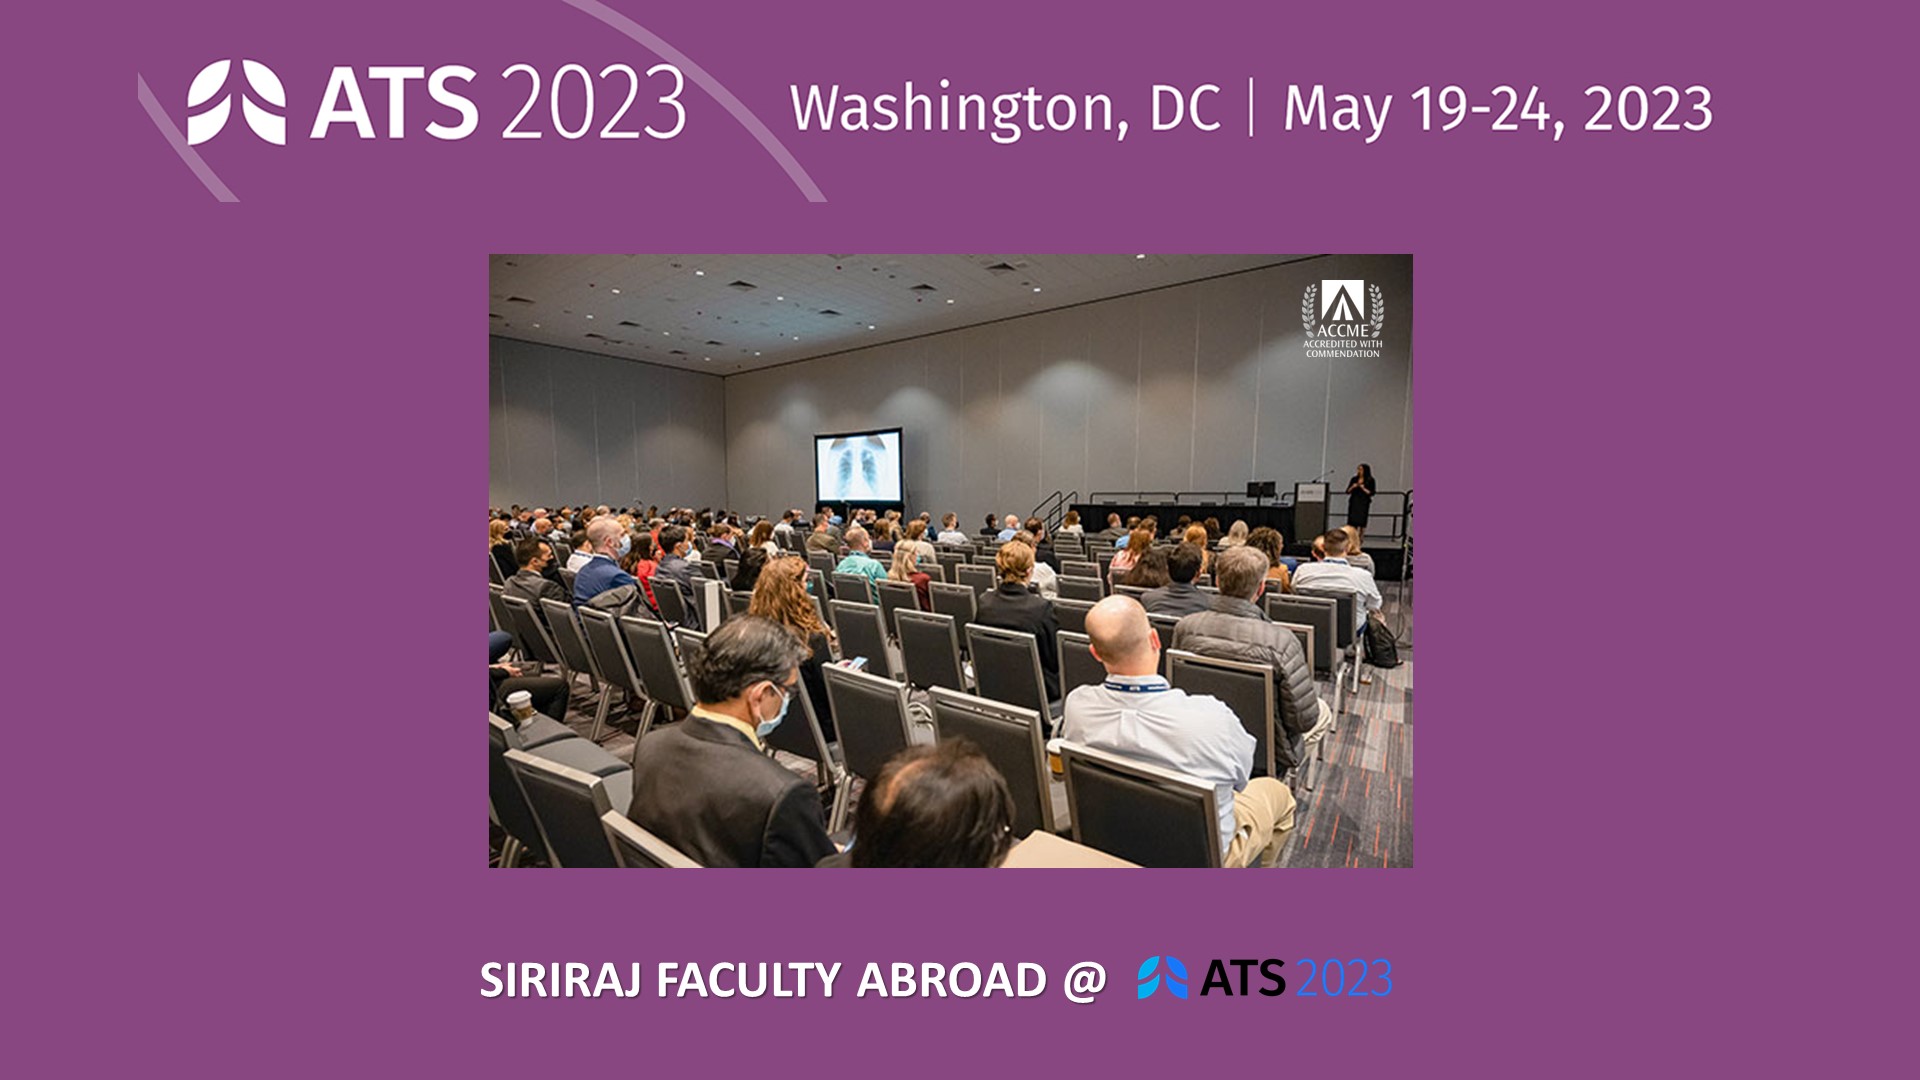 Siriraj Faculty Abroad at the American Thoracic Society Conference 2023 in USA